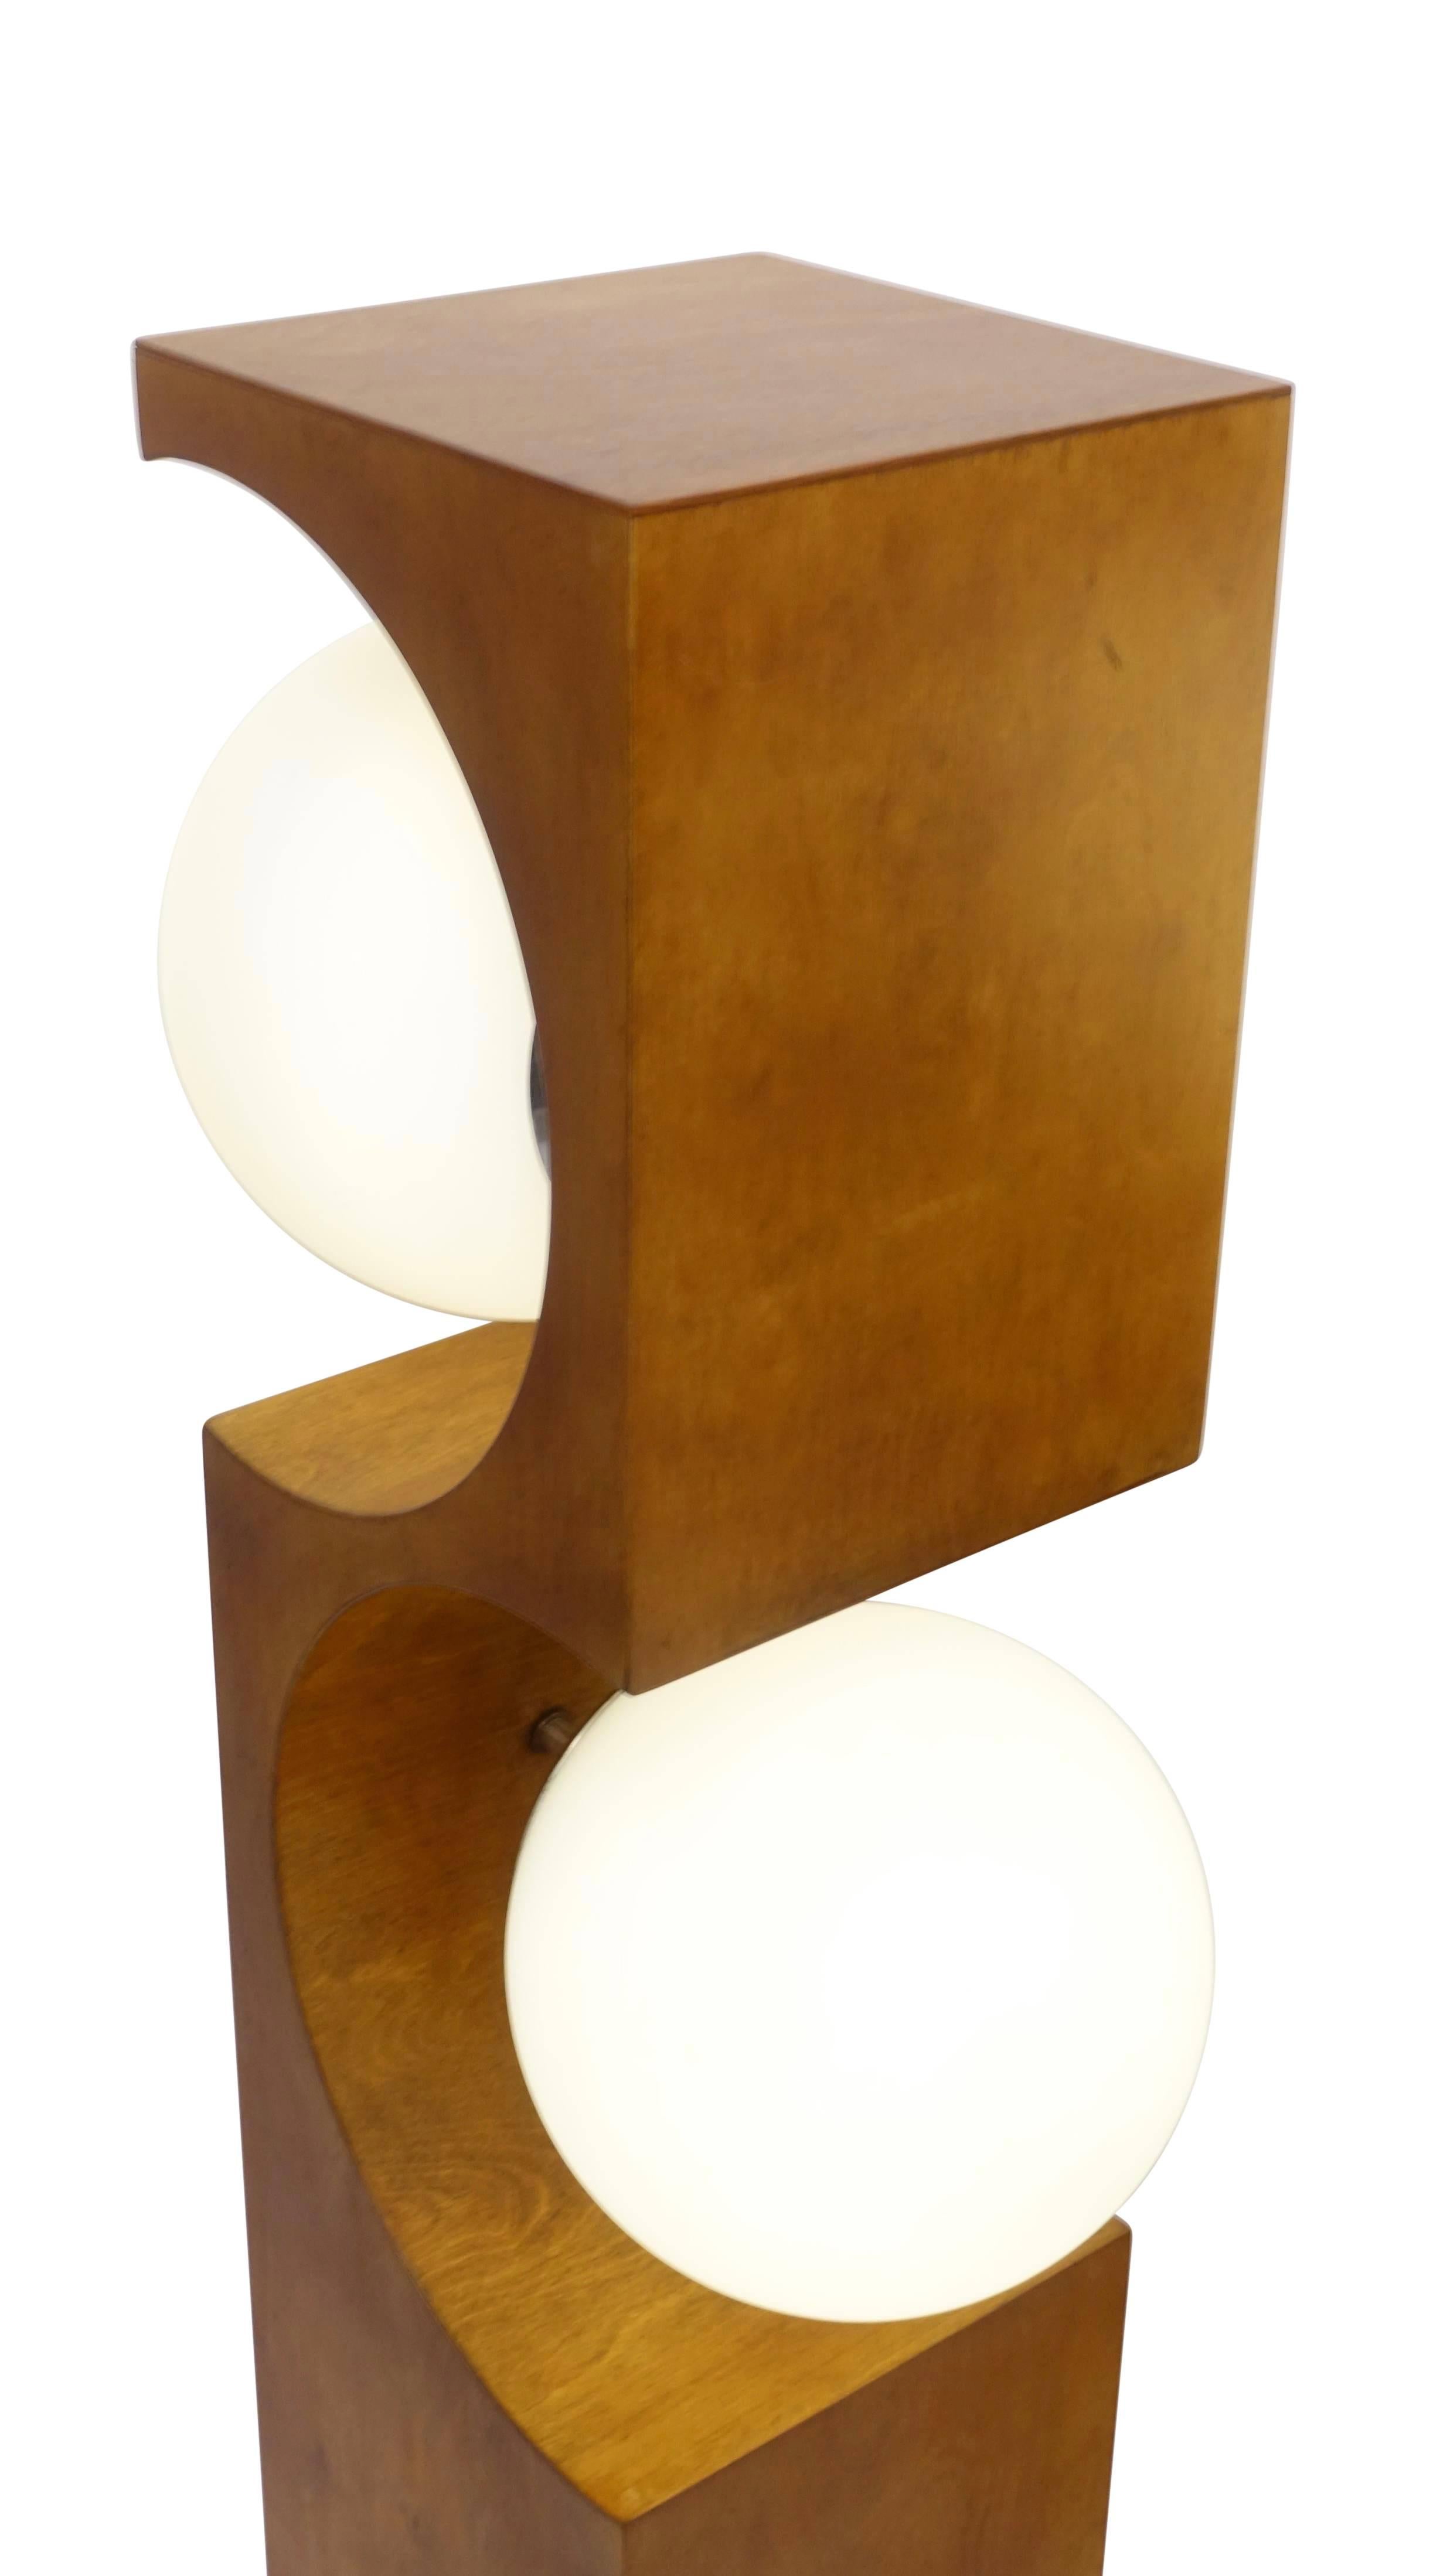 American Pair of Mid-20th Century Milo Baughman Wood Cut-Out Lamps